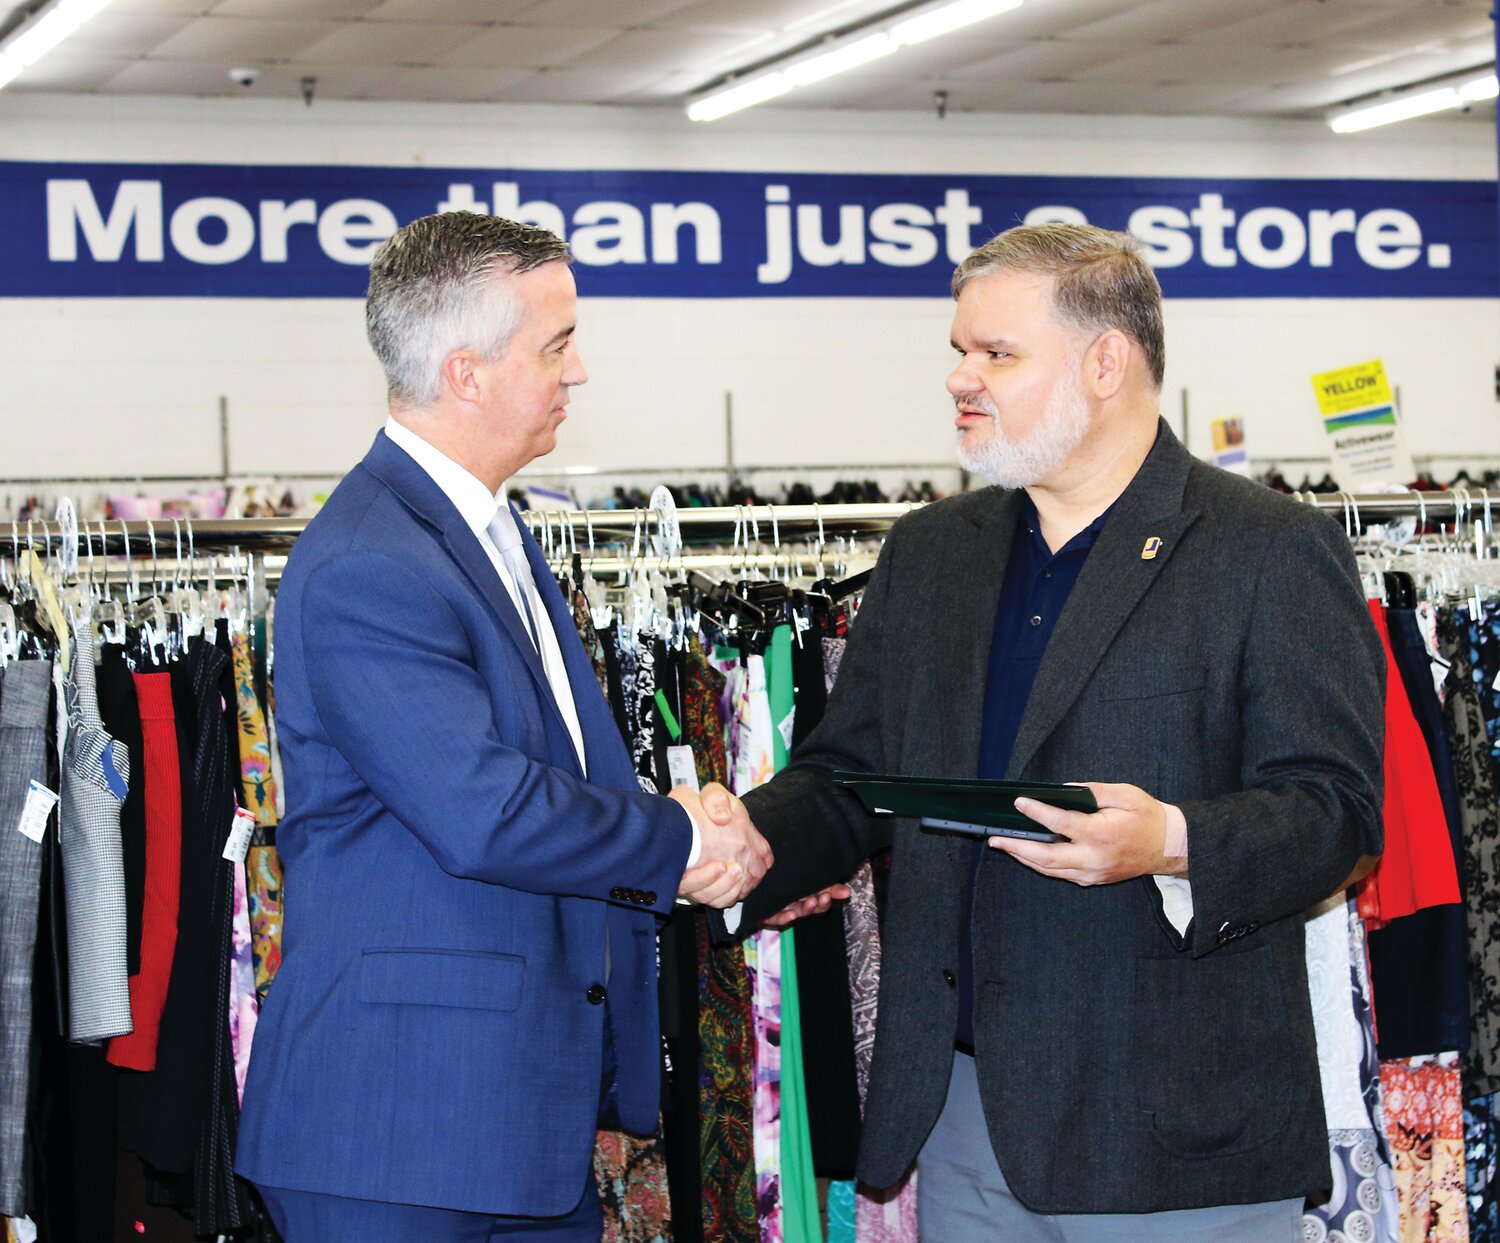 Bucks County Commissioner Robert Harvie, left, and Goodwill Keystone Area President and CEO Ed Lada shake hands inside the store.